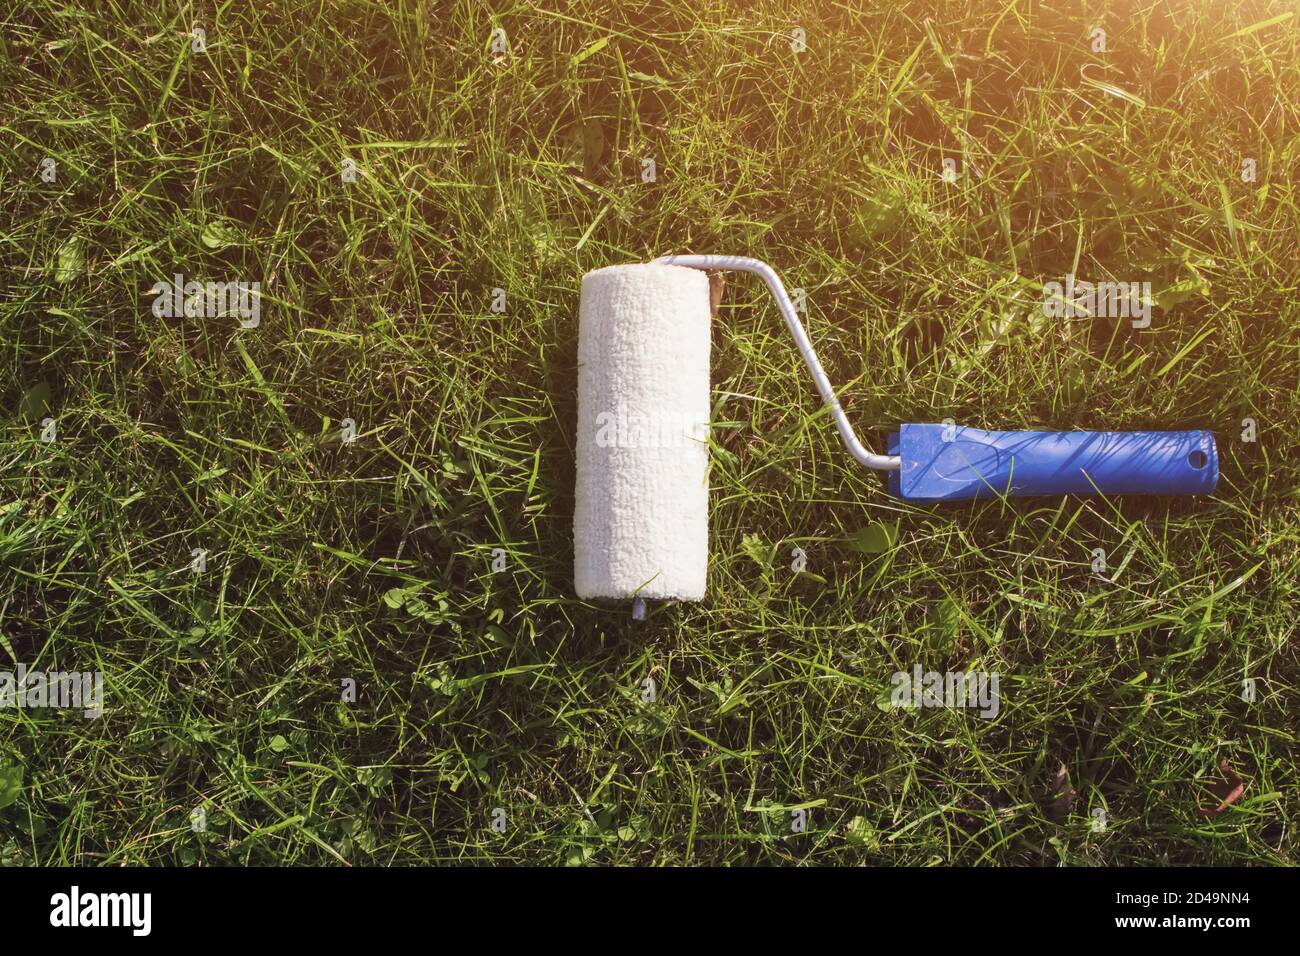 Top view of a paint roller with an blue handle, that is painting a grassy strip using lawn as color. Ecological concept Stock Photo